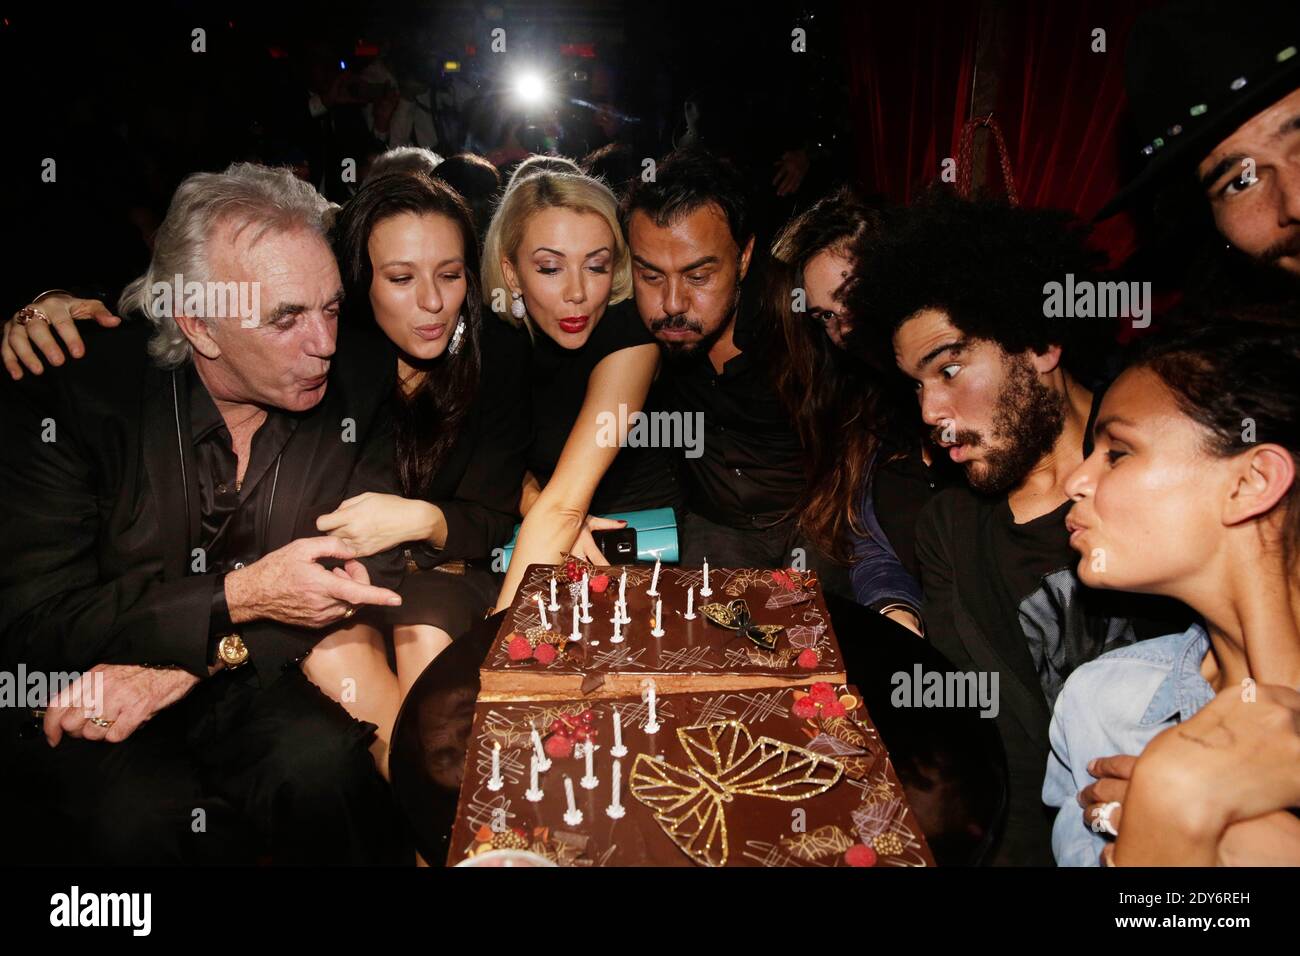 Muratt Atik, Joanna Atik, Peter Stringfellow and his wife, Lola Dewaere, Laurence Roustandjee and Alexandre Le Strat attending the New 'Stringfellows' Opening party and Muratt Atik's Birthday, in Paris, France on November 27, 2014. Photo by Jerome Domine ABACAPRESS.COM Stock Photo